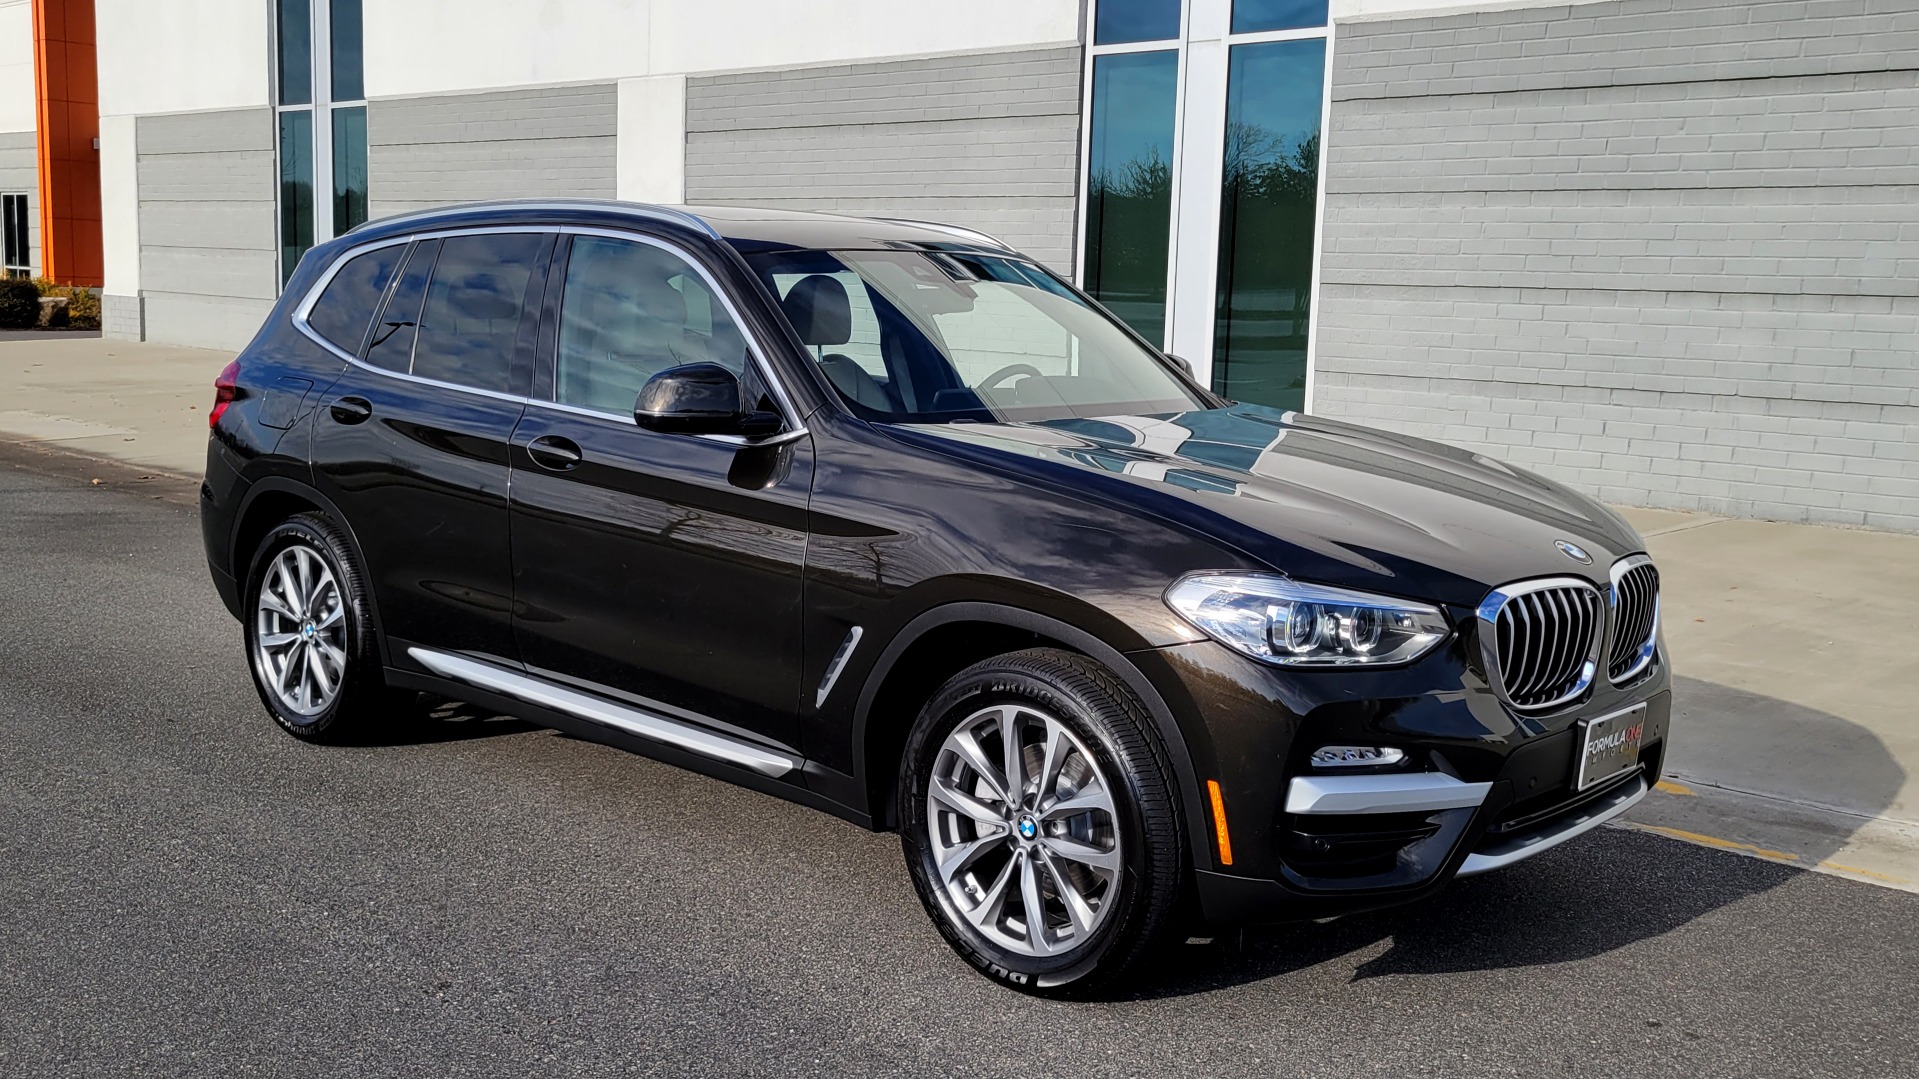 Used 2019 BMW X3 XDRIVE30I 2.0L SUV / NAV / PANO-ROOF / DRVR ASST / HTD STS / REARVIEW for sale $40,595 at Formula Imports in Charlotte NC 28227 6